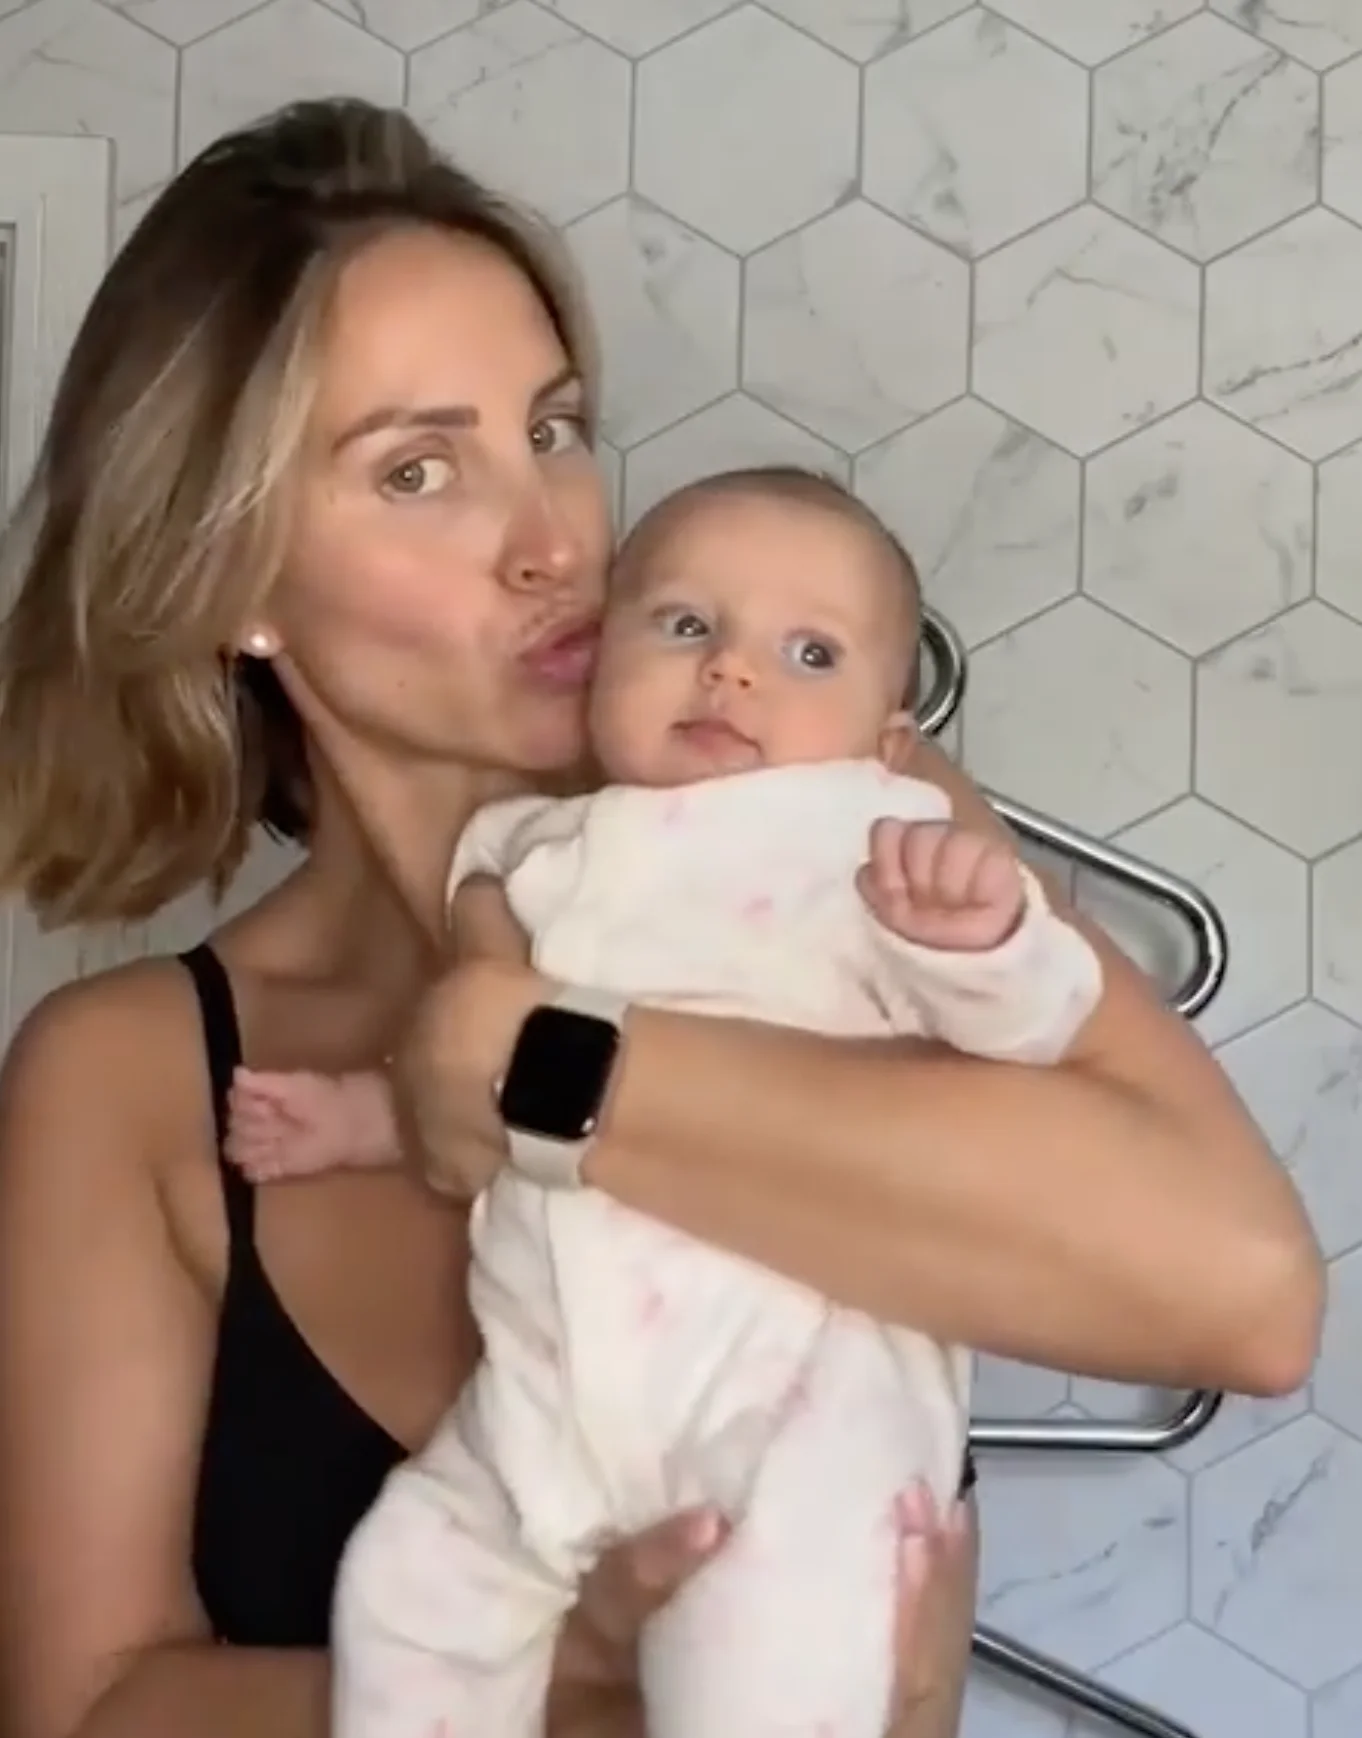 Ferne McCann gave birth to her daughter back in 2017